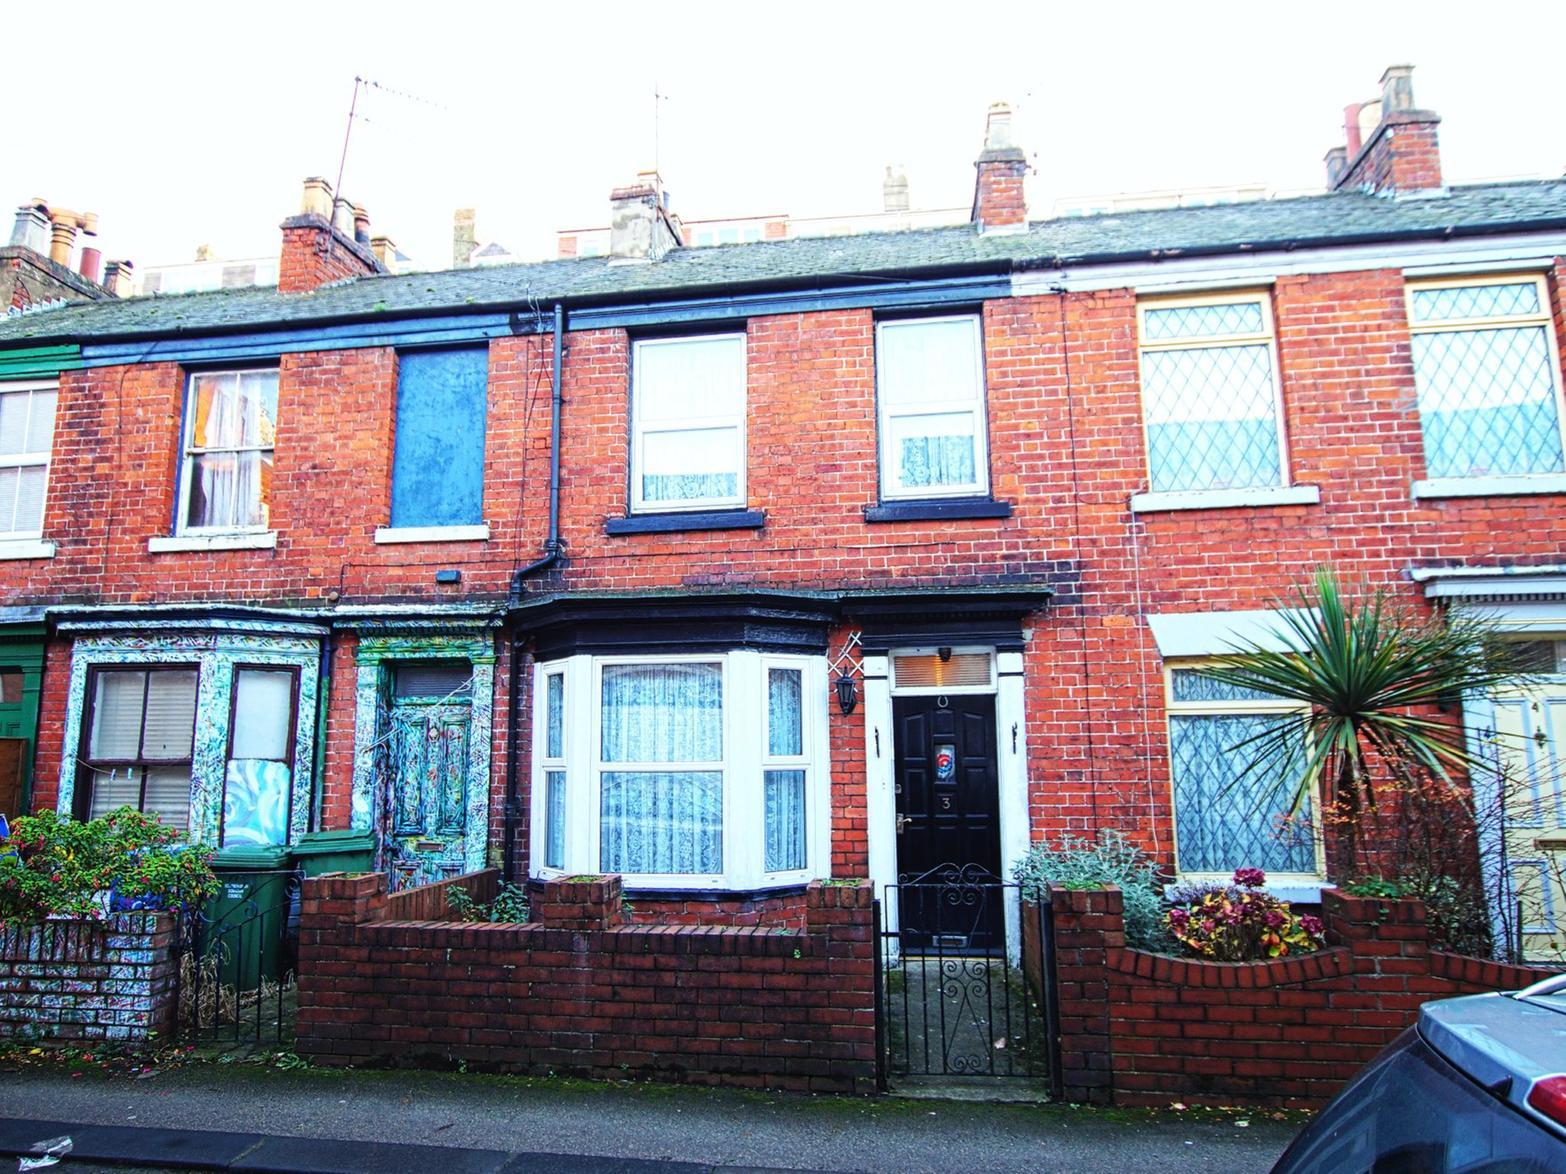 A terraced house with three bedrooms and two bathrooms for sale for 99,950. The rear of the property has been extended to provide annex-style accommodation with a bedroom and wet room. It is being sold with no onward chain.